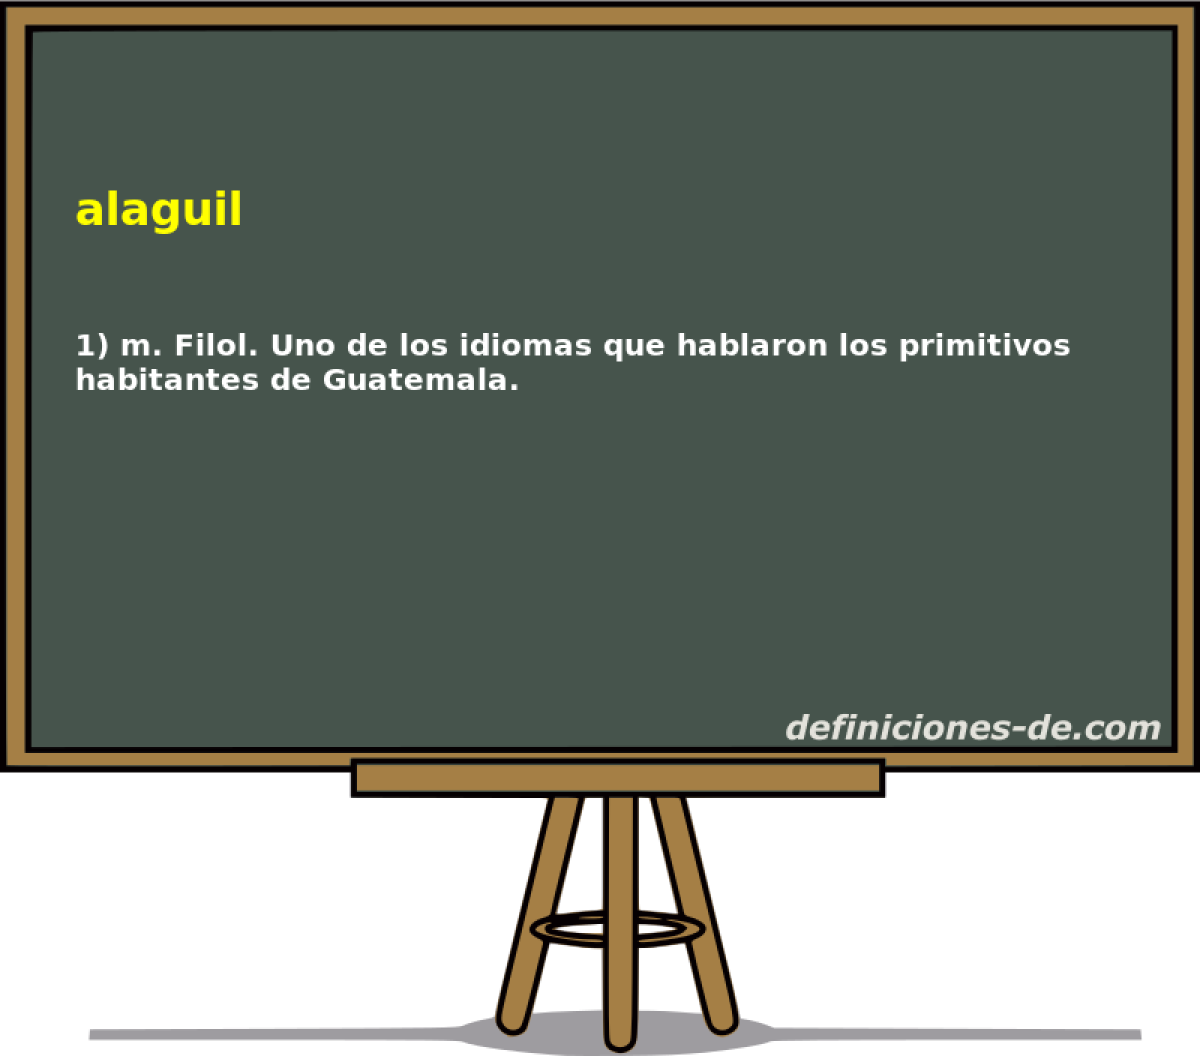 alaguil 